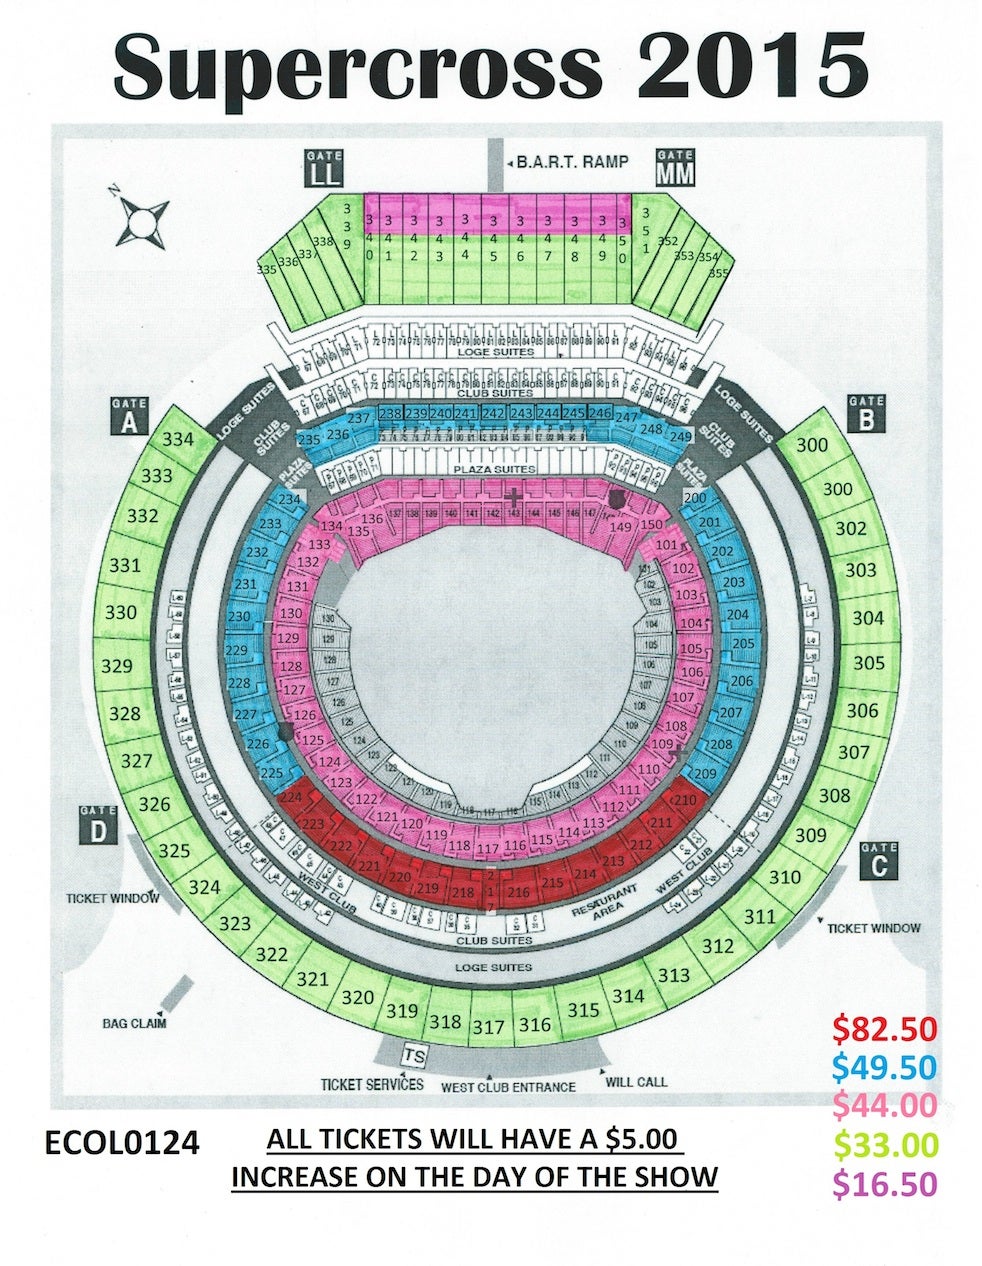 Oracle Coliseum Seating Chart